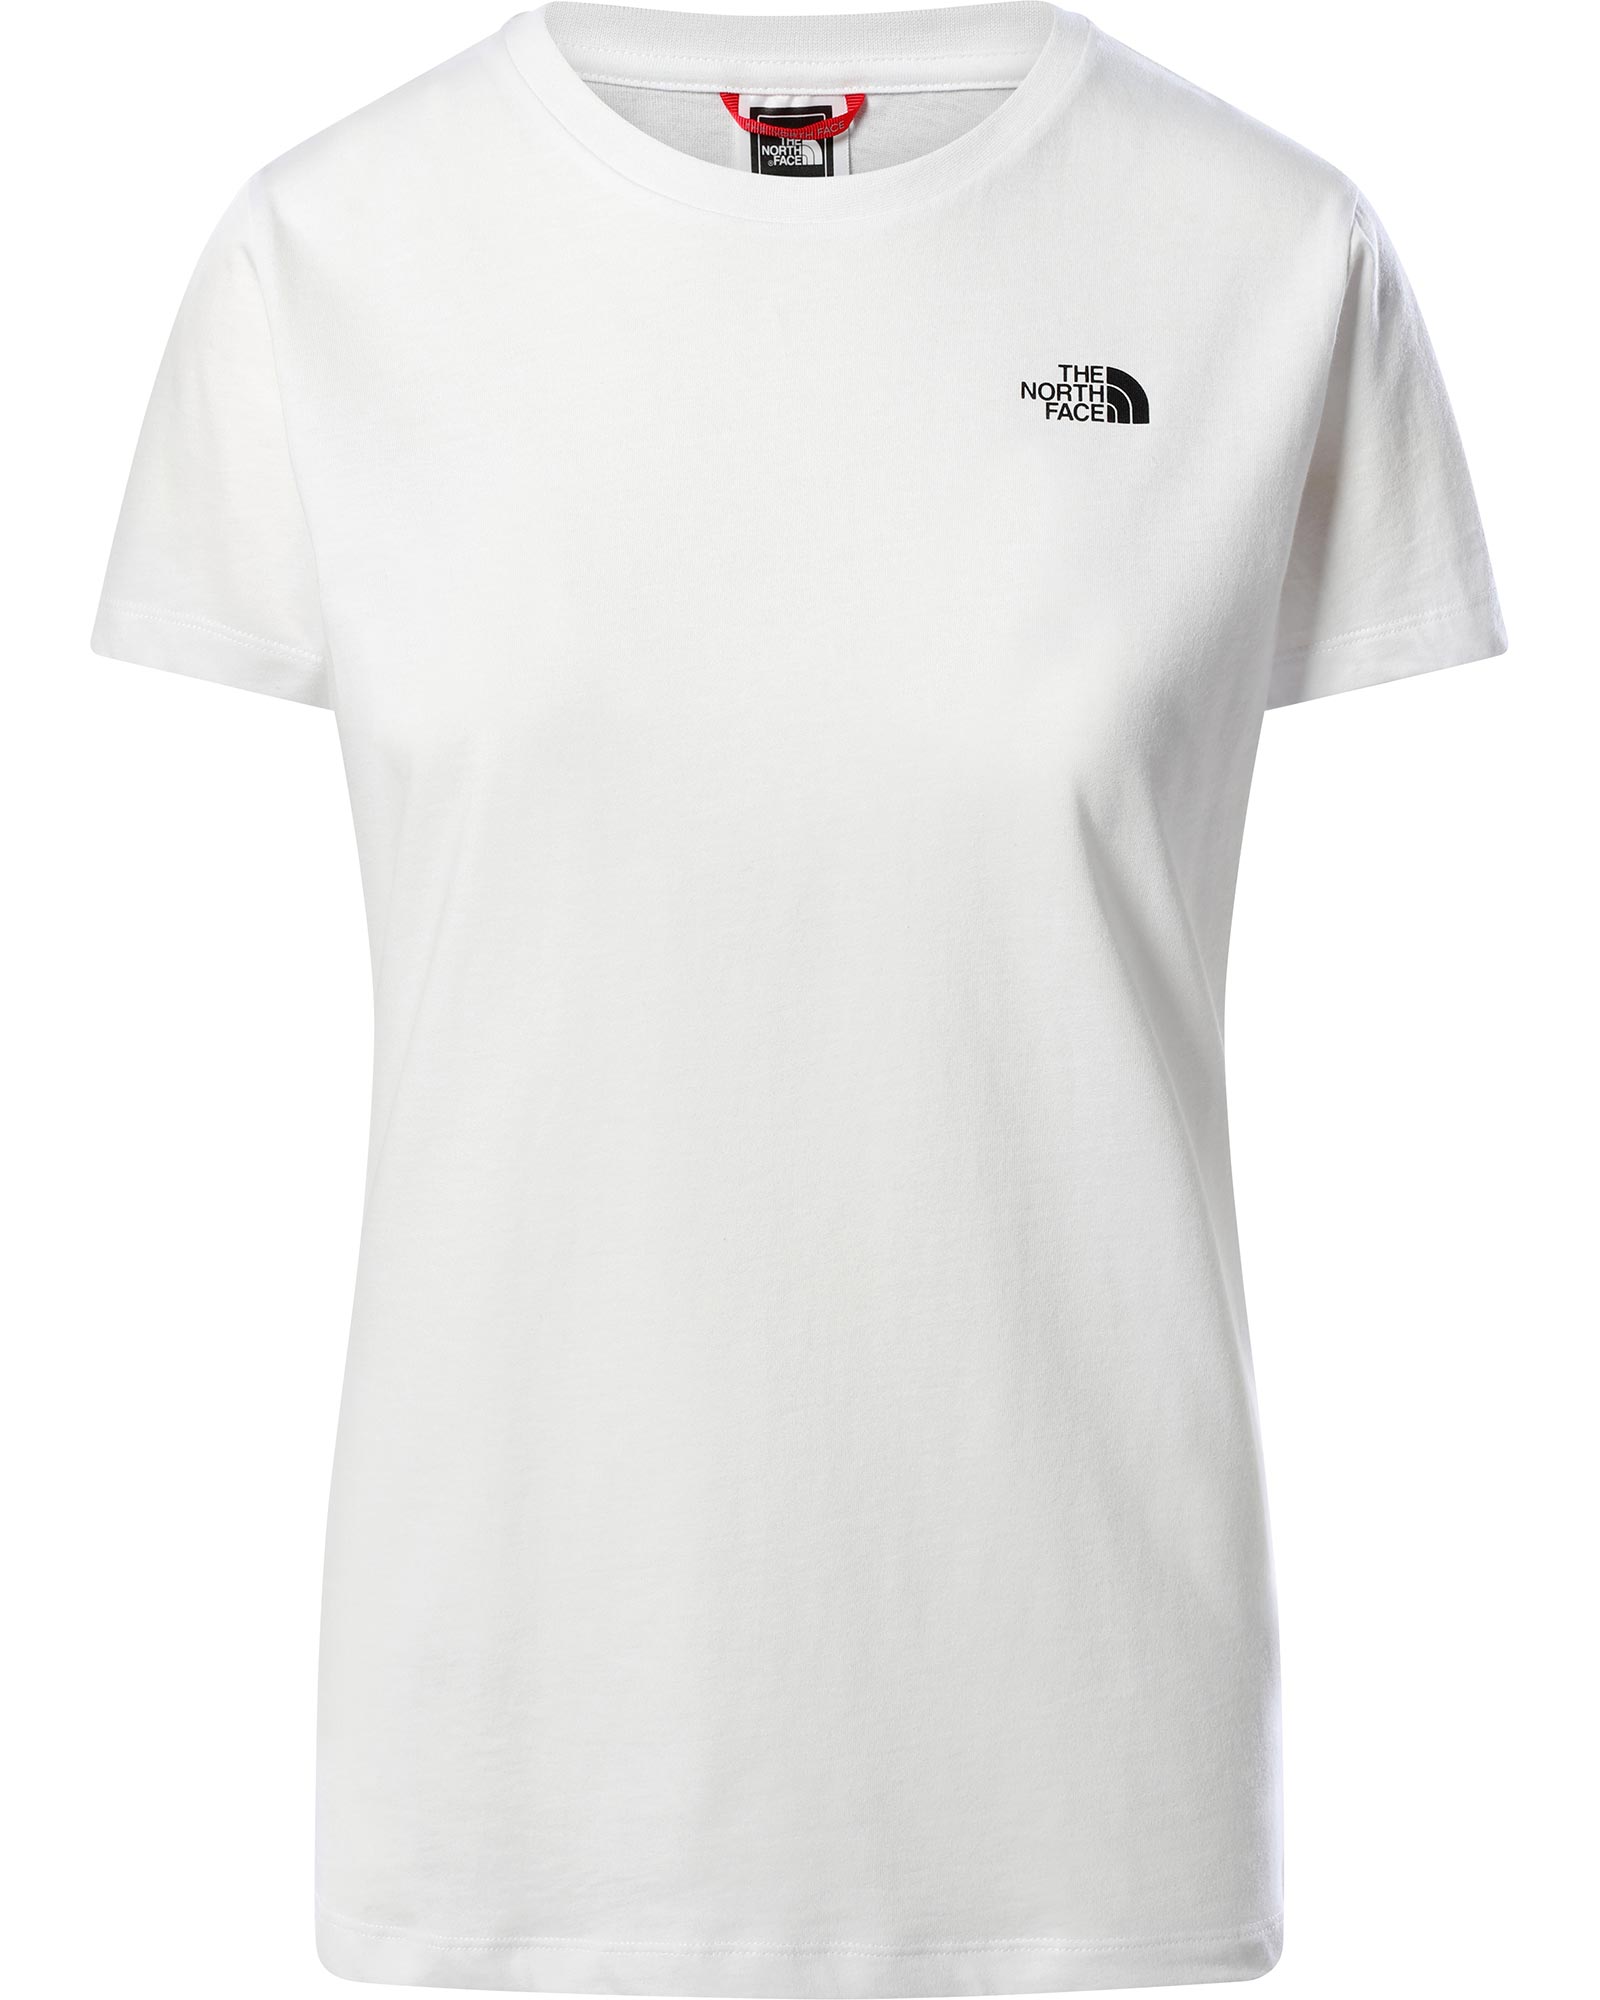 The North Face Simple Dome Women’s T Shirt - TNF White XS